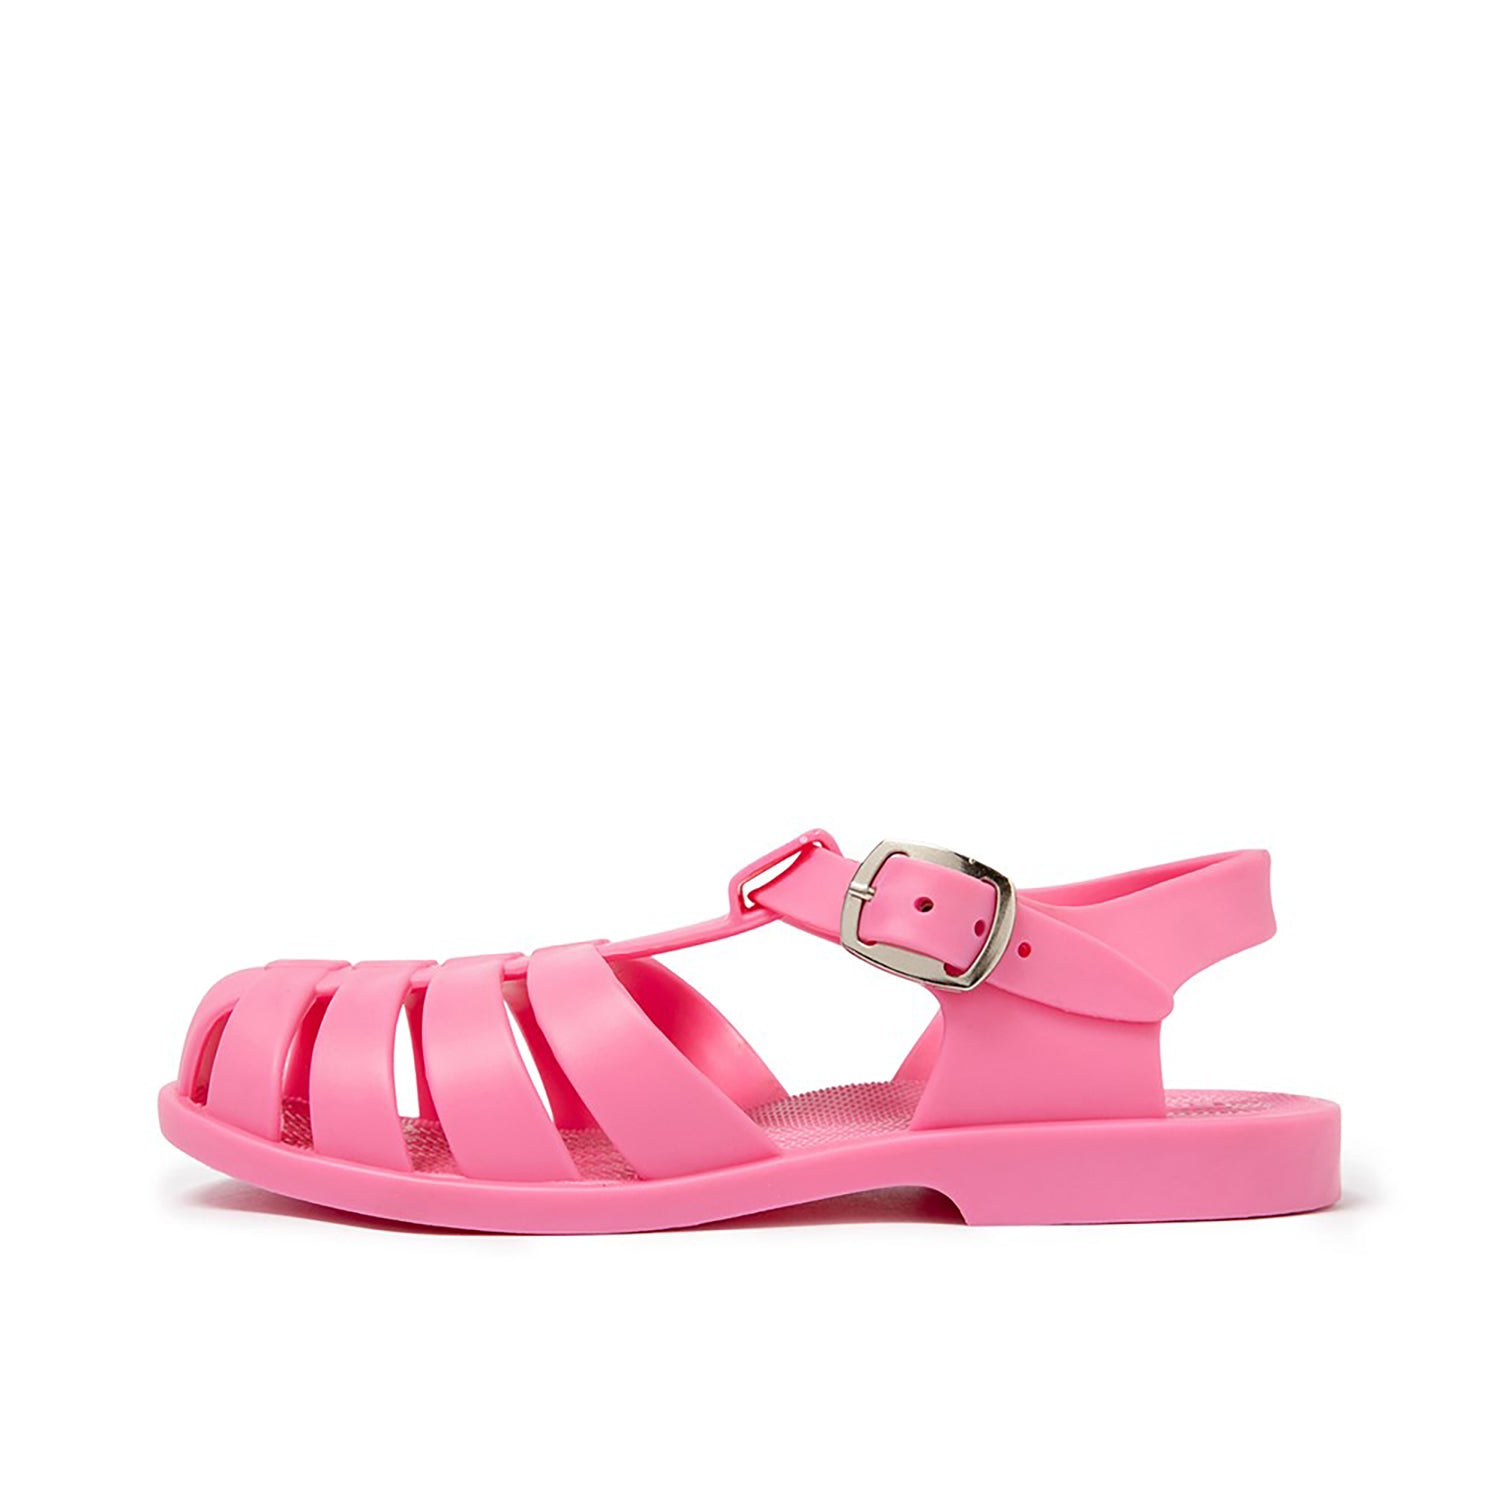 CALL IT LOVE Jelly Sandals - Shop Online | shooshoos.co.za